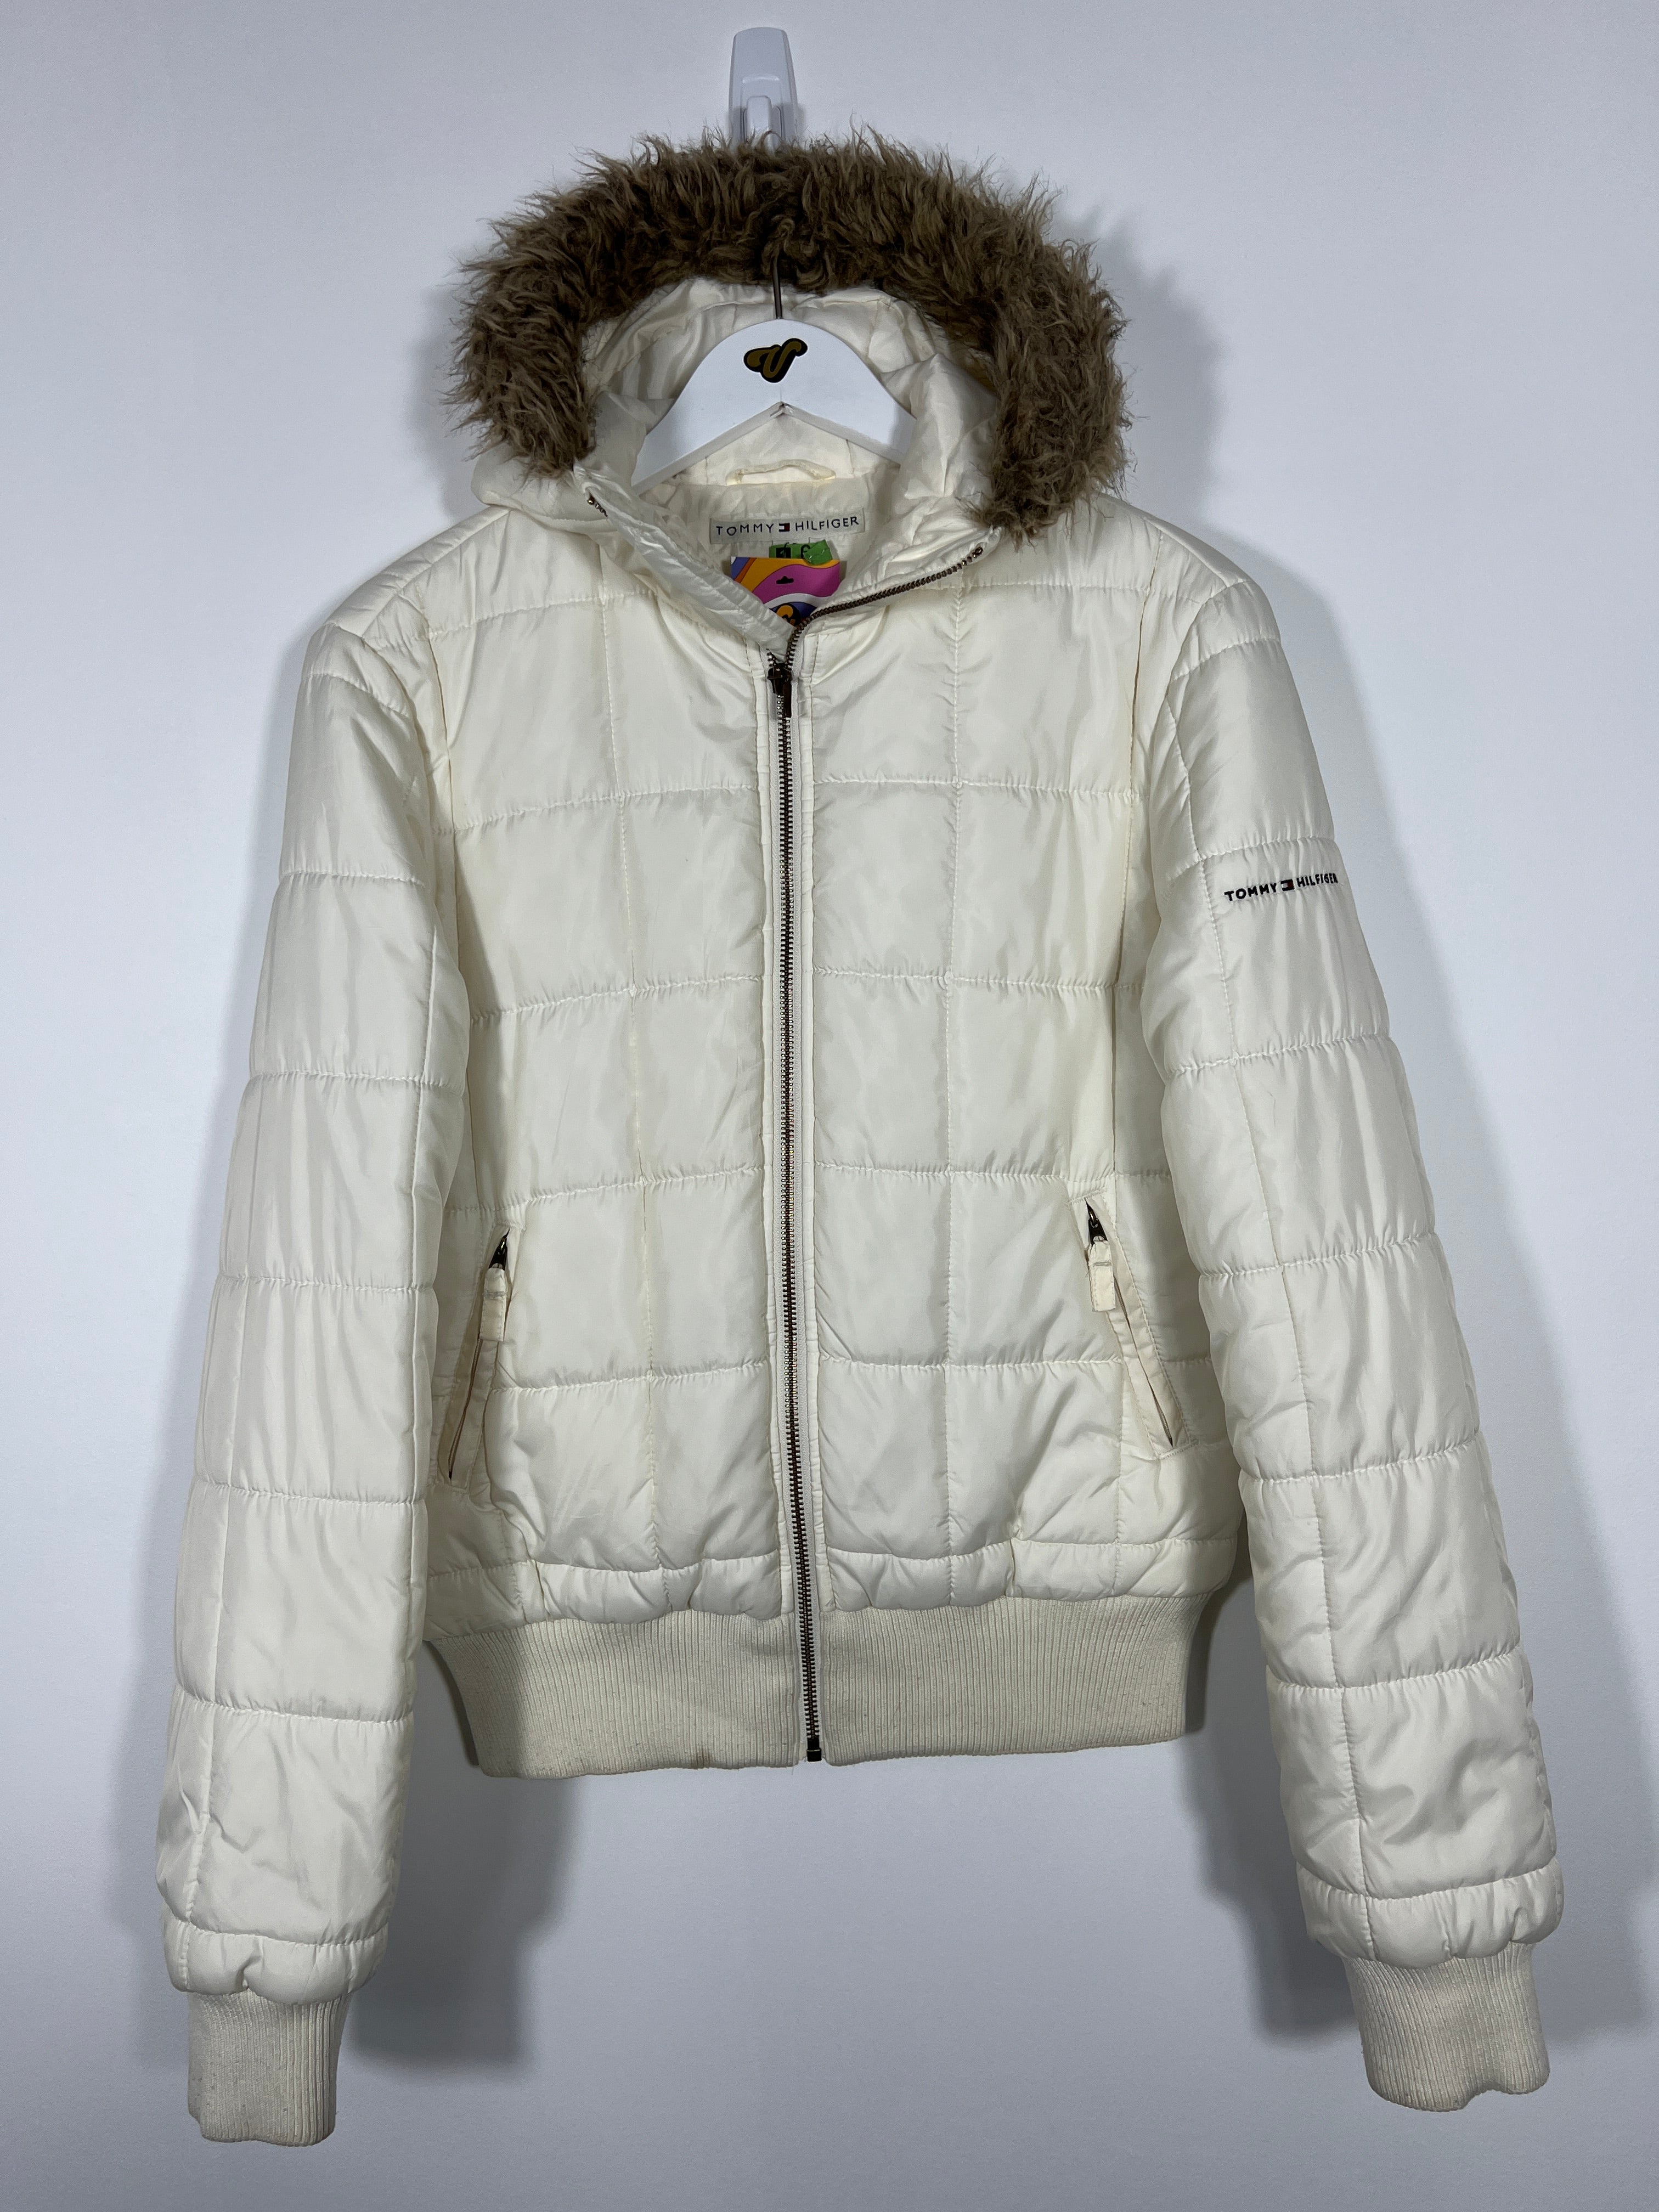 Tommy Hilfiger Insulated Jacket - Women's Small